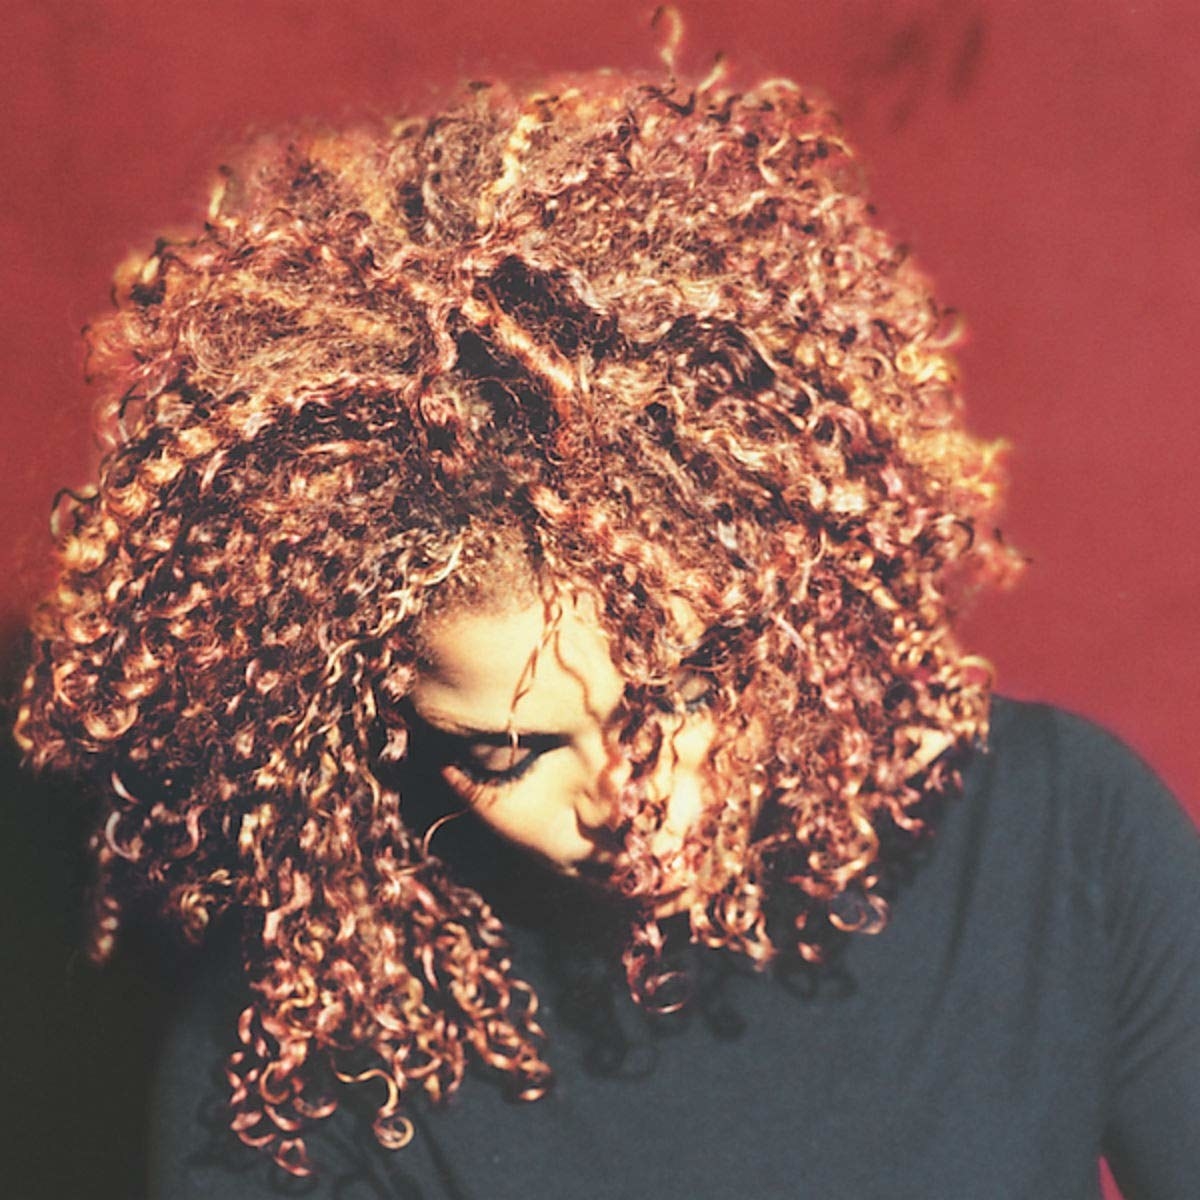 Cover of The Velvet Rope which features Janet looking down with her hair covering part of her face